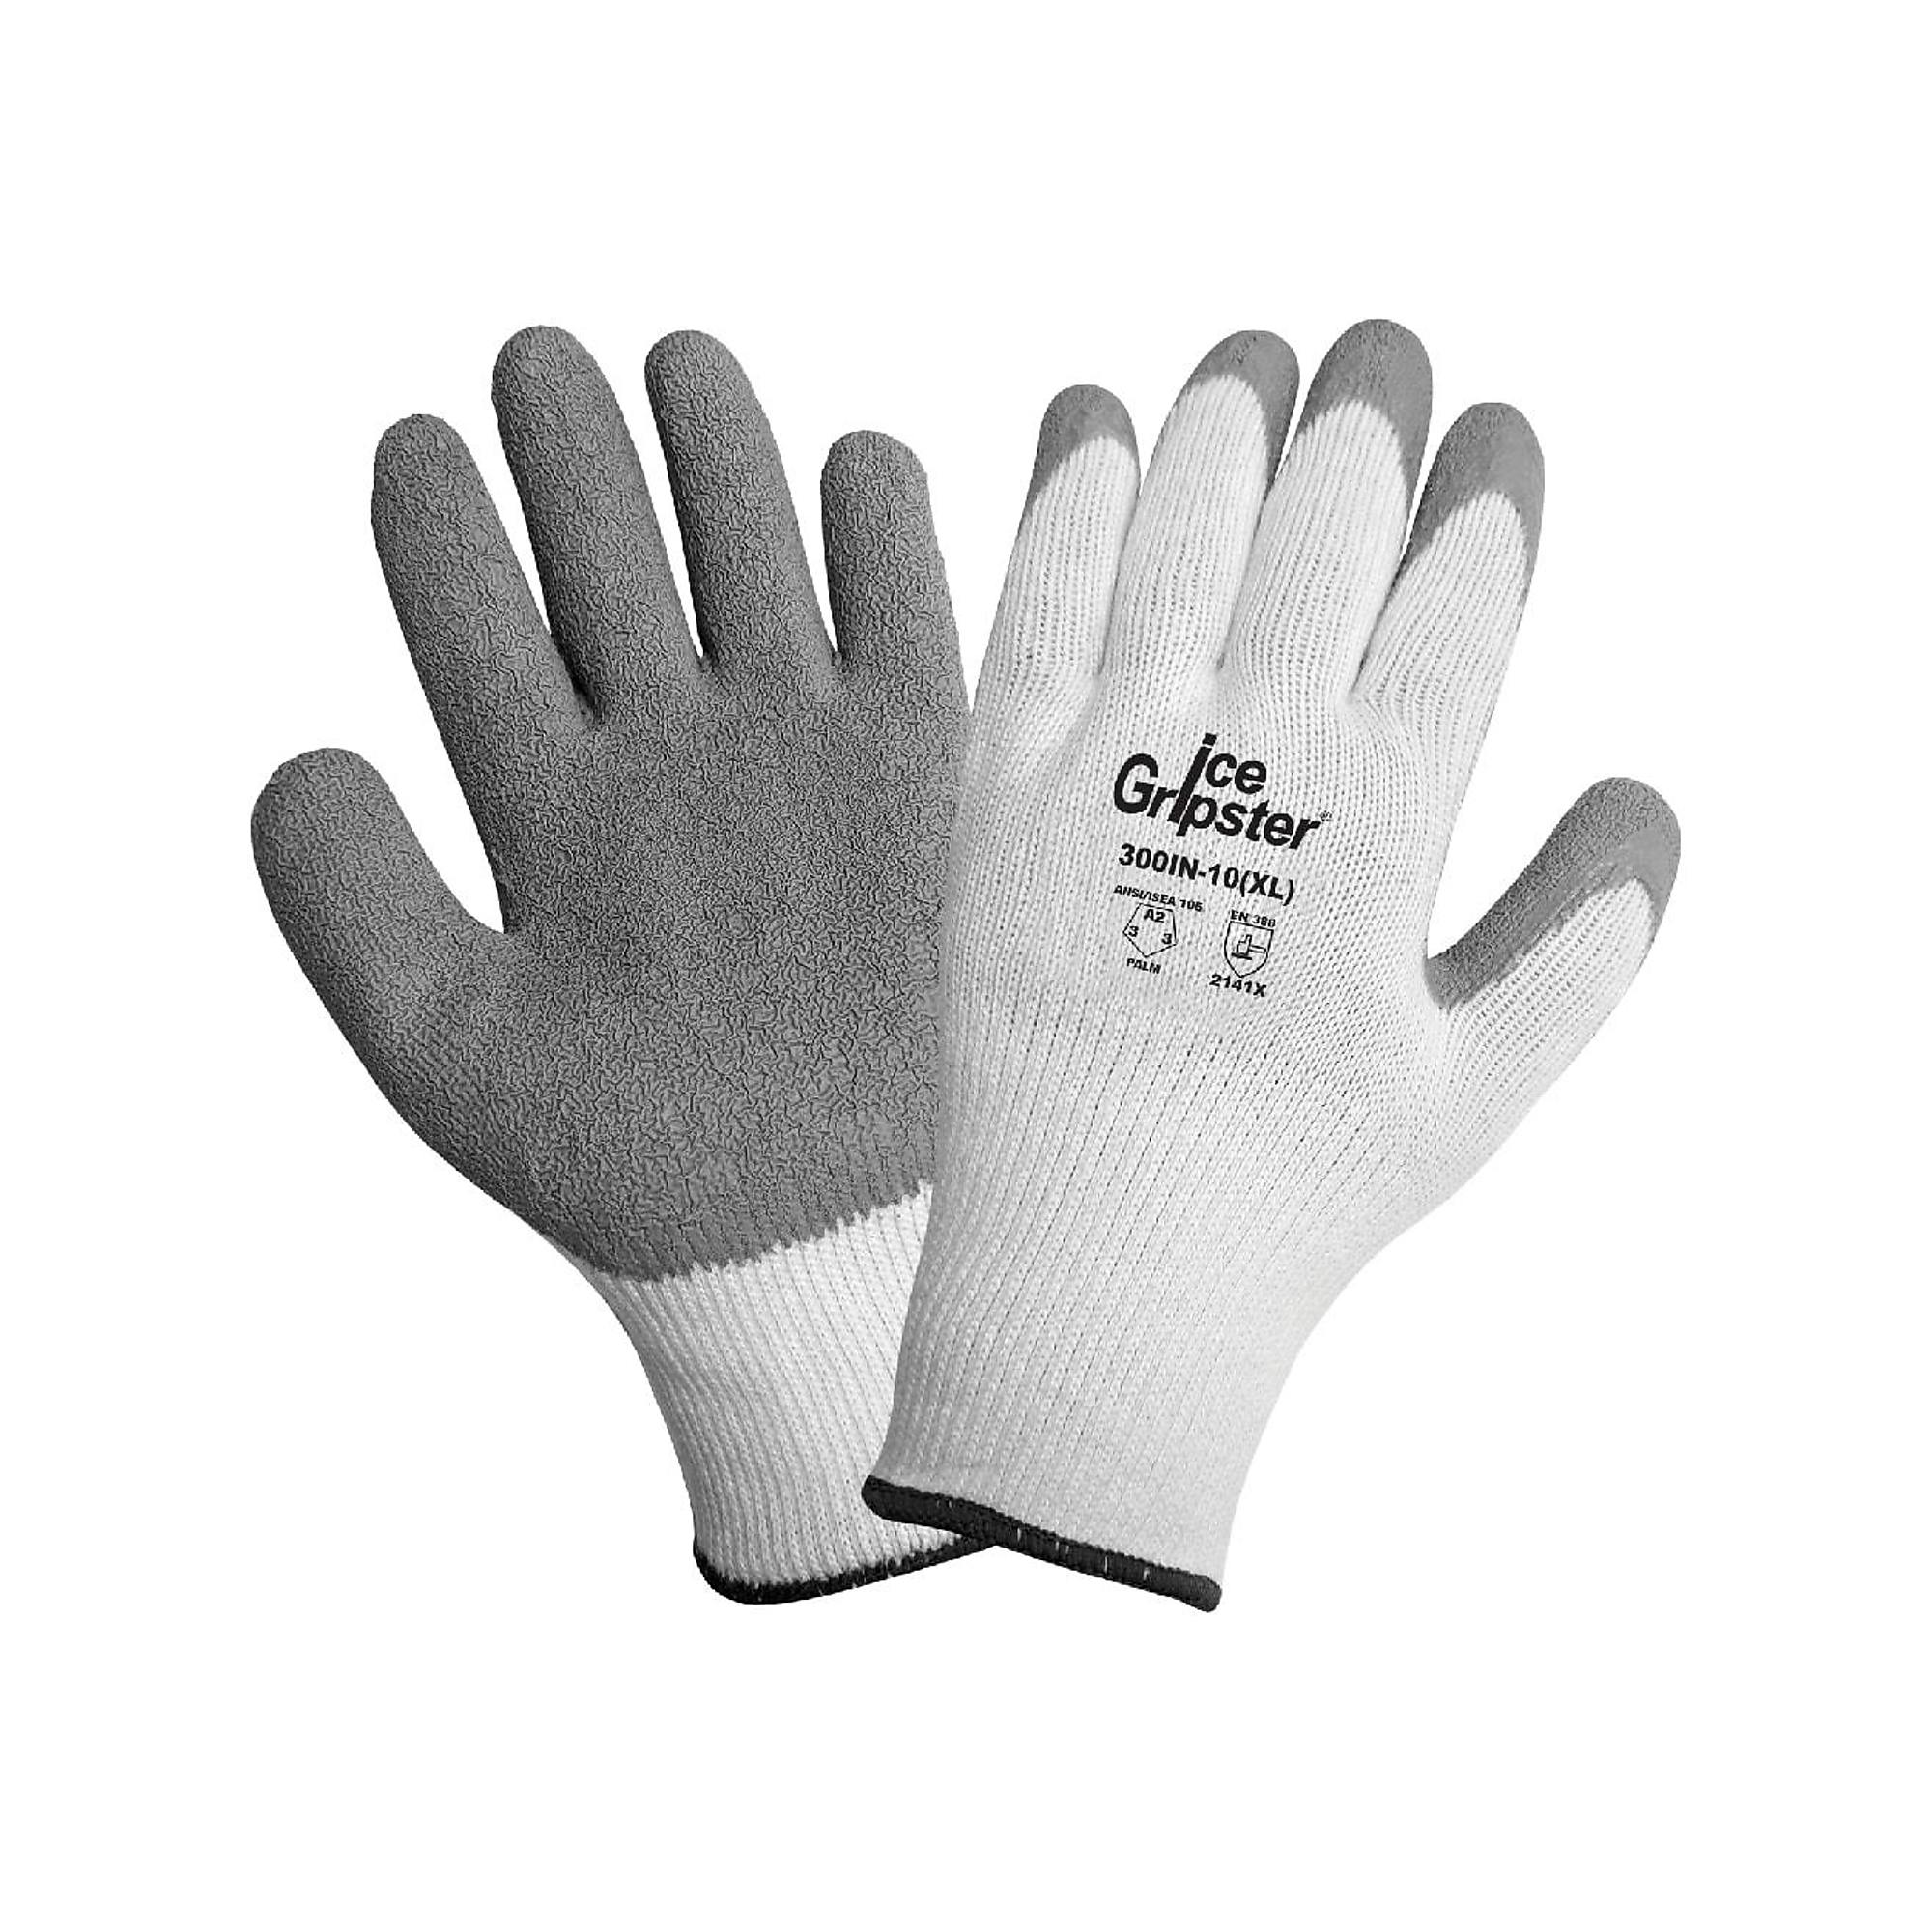 Global Glove Ice Gripster , White, Insulated, Rubber Dip, Cut Resist A2 Gloves- 12 Pairs, Size S, Color White/Gray, Included (qty.) 12 Model 300IN-7(S